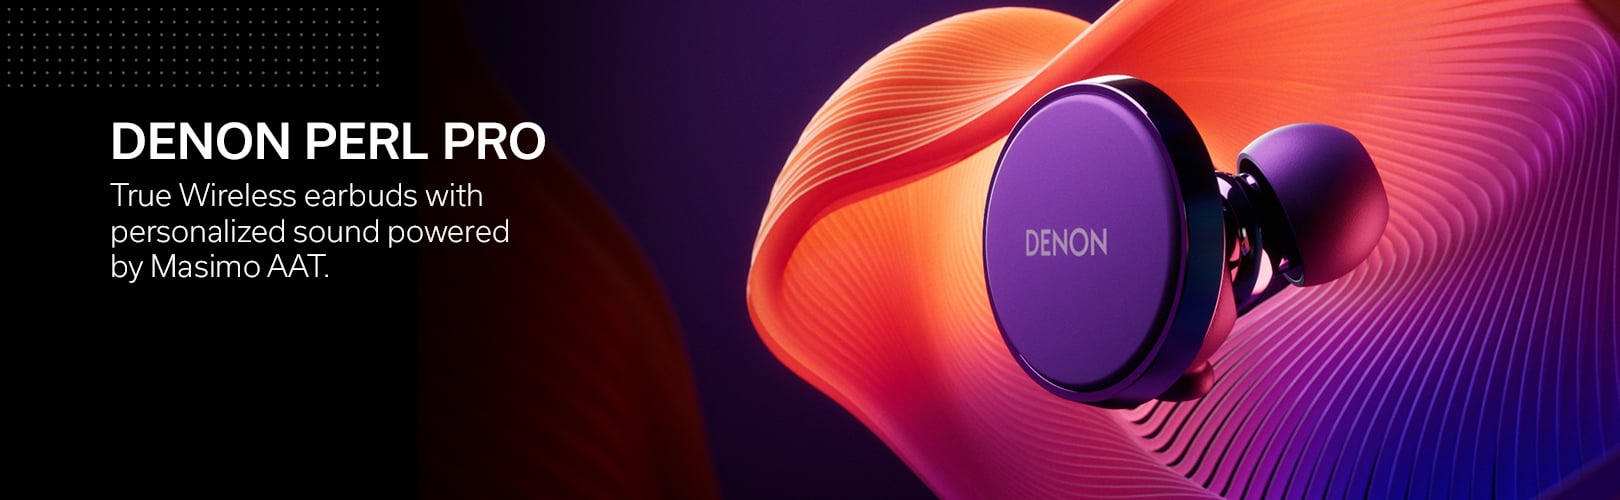 Denon PerL Pro - True wireless earbuds with personalized sound powered by Masimo AAT